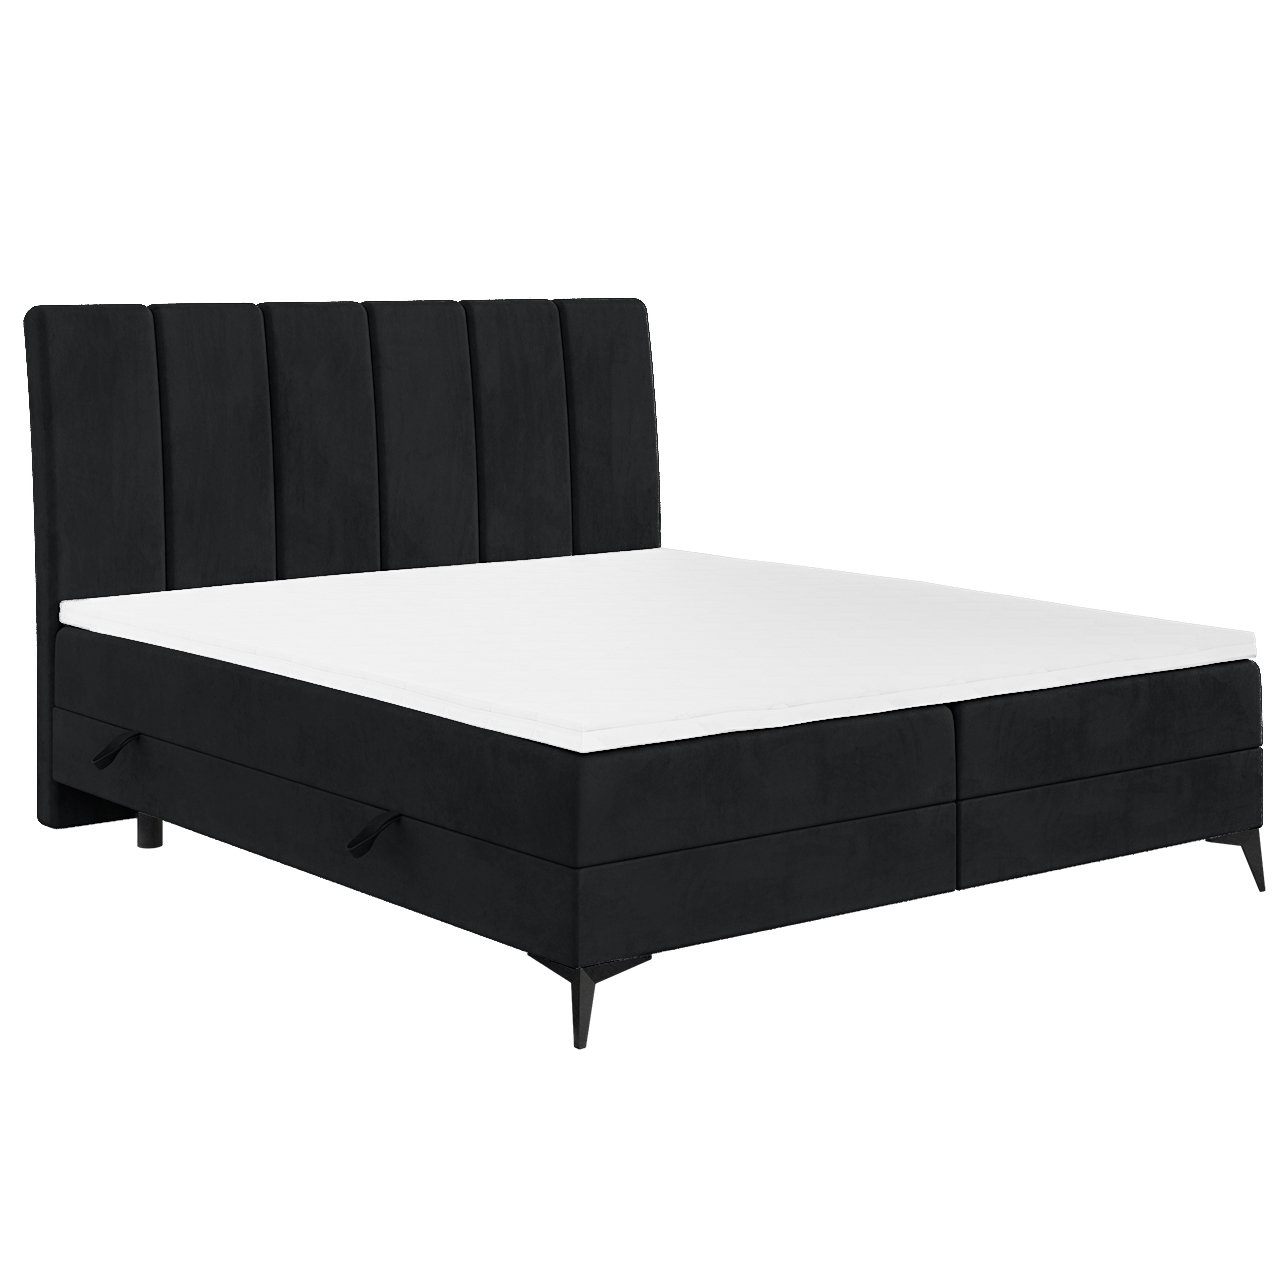 Upholstered bed ABERT 140x200 riviera 100